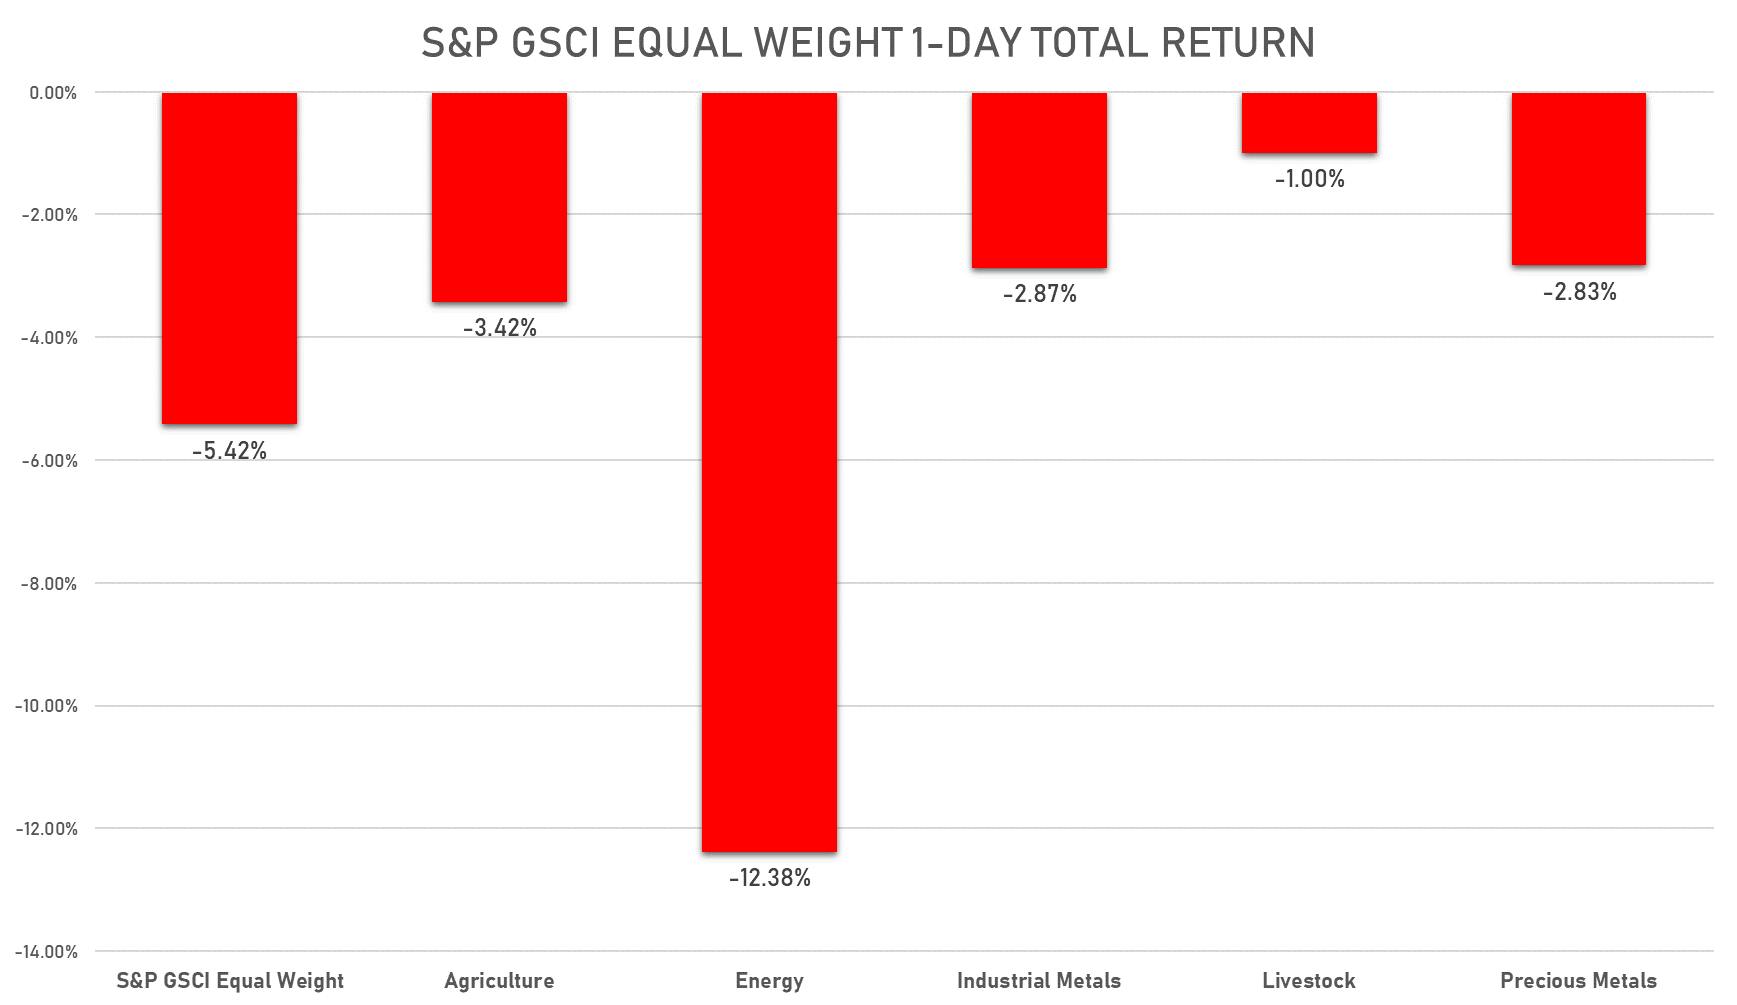 S&P GSCI Sub Indices Today | Sources: phipost.com, FactSet data 